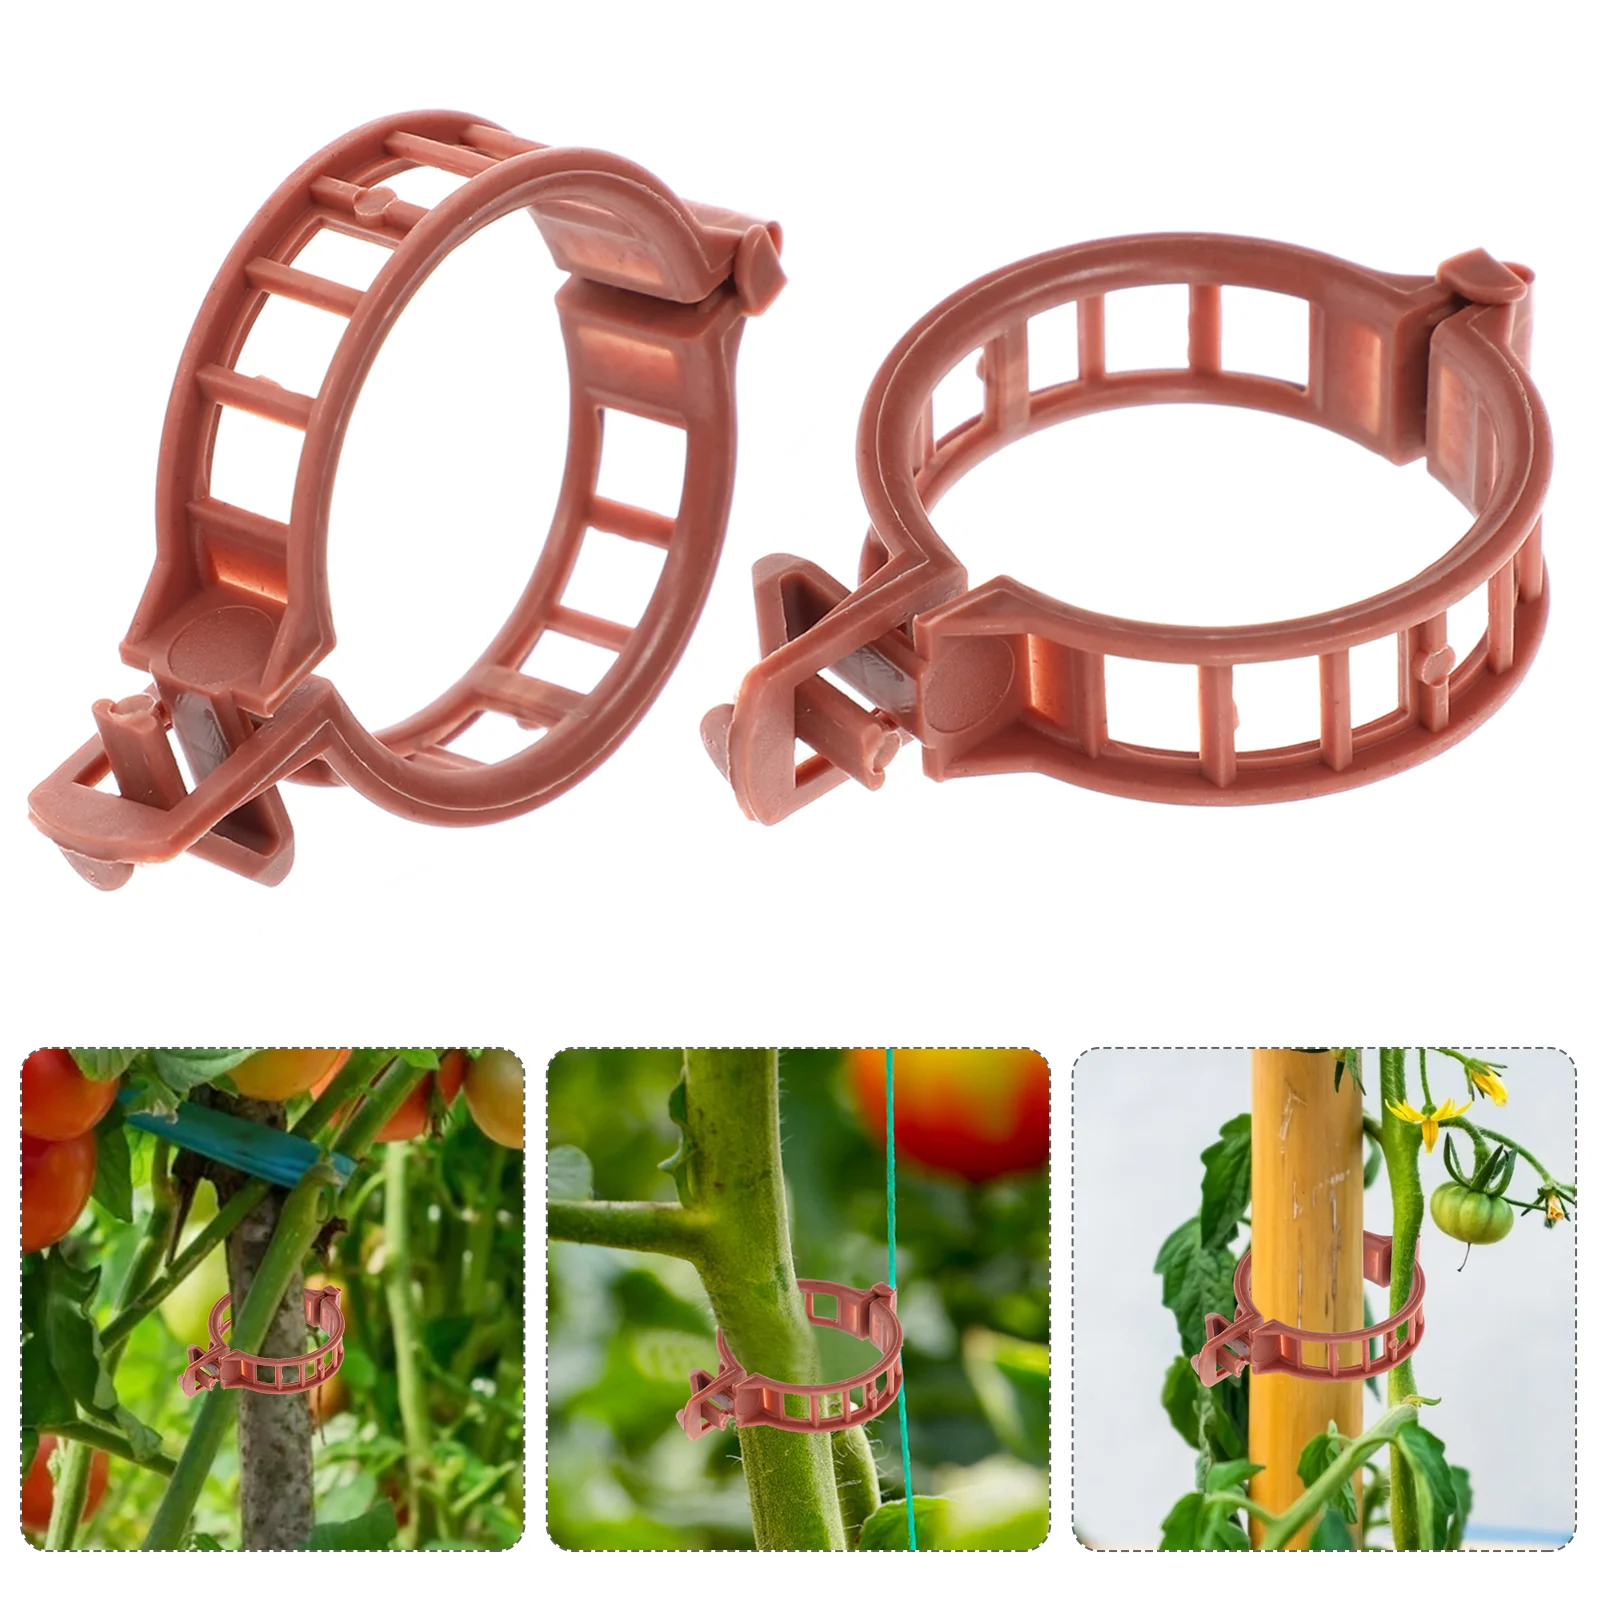 

Clips Greenhouse Support Gardening Flower Tomato Stem Supports Plastic Vine Fixing